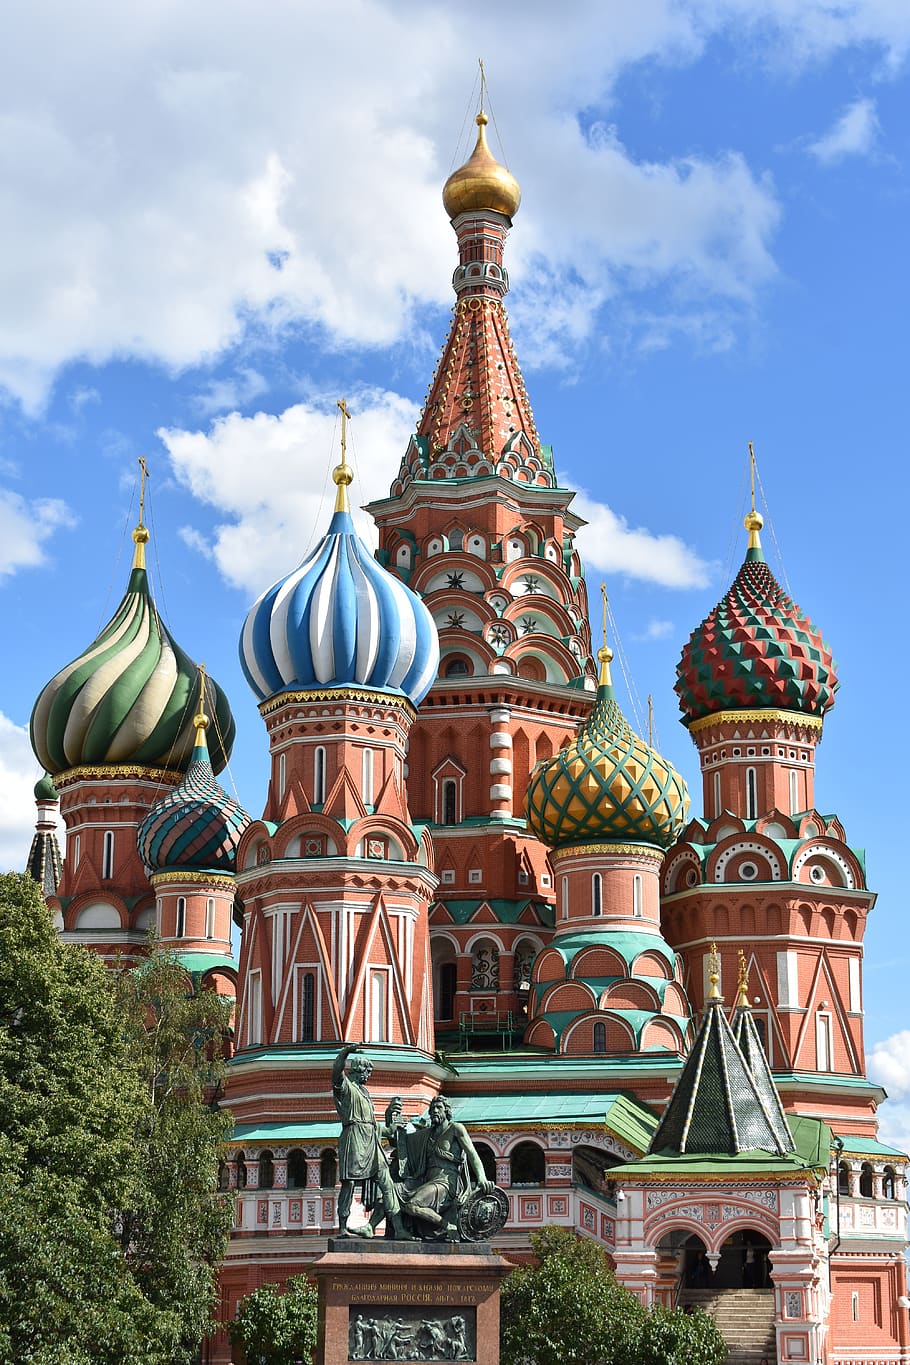 st, basil's cathedral, saint basil's cathedral, moscow, russia, europe, travel, architecture, landmark, church